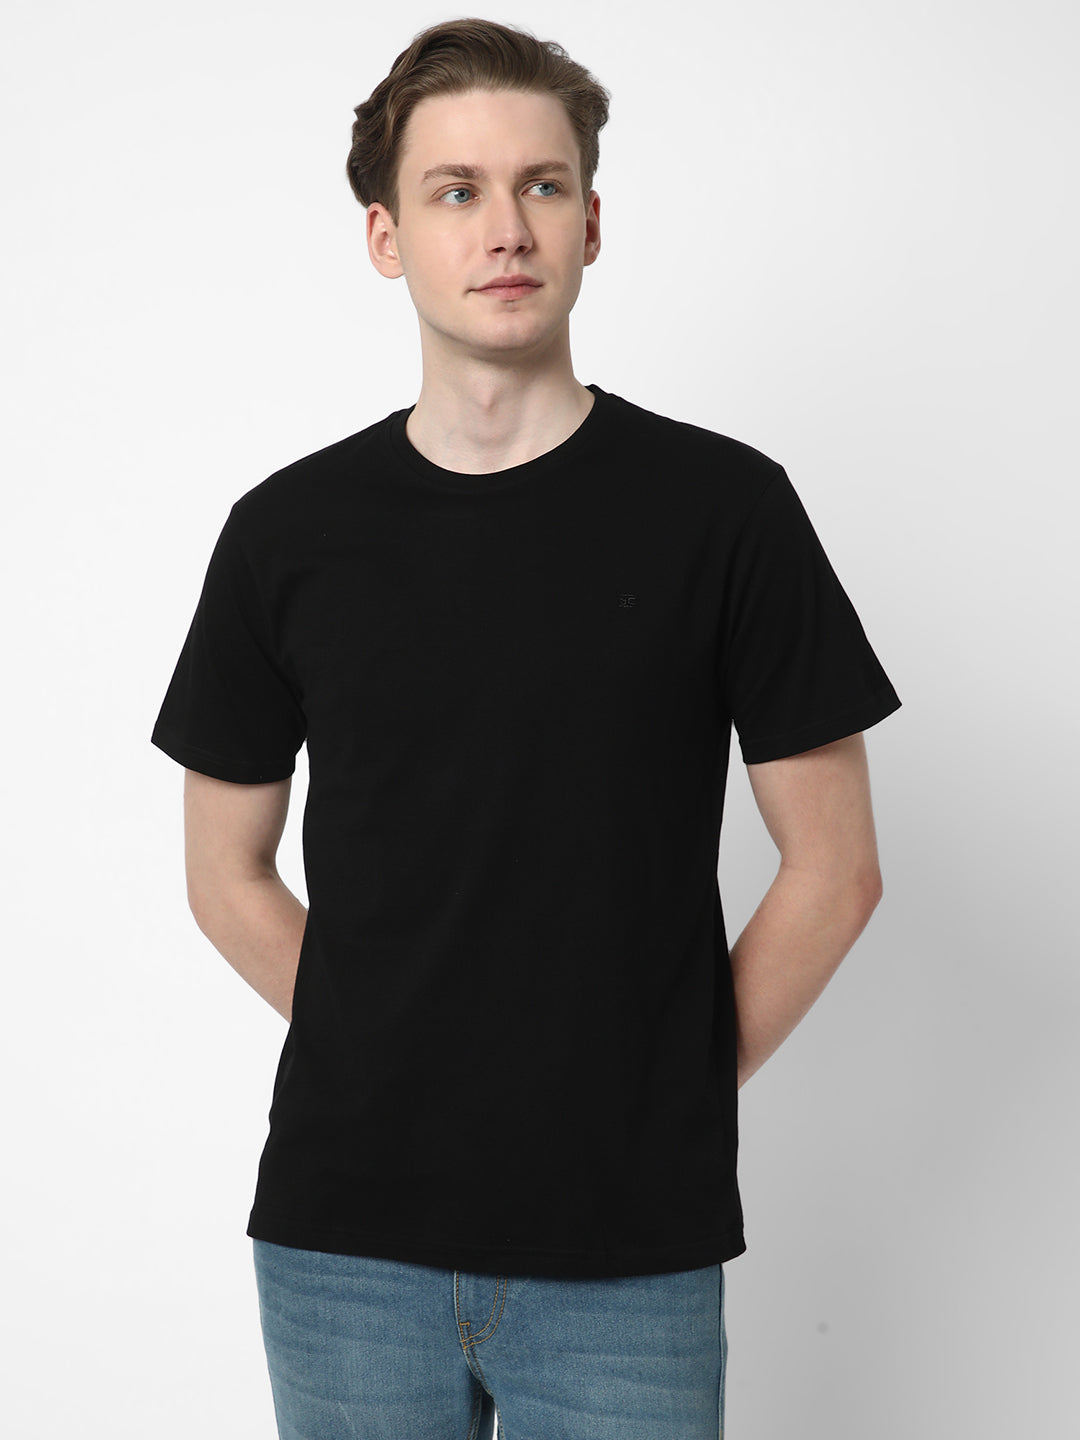 Cotstyle Cotton Fabrics Round Neck Short Length Plain Half Sleeve Casual & Daily Wear Men's T-Shirts -  Pack of 1 - Black